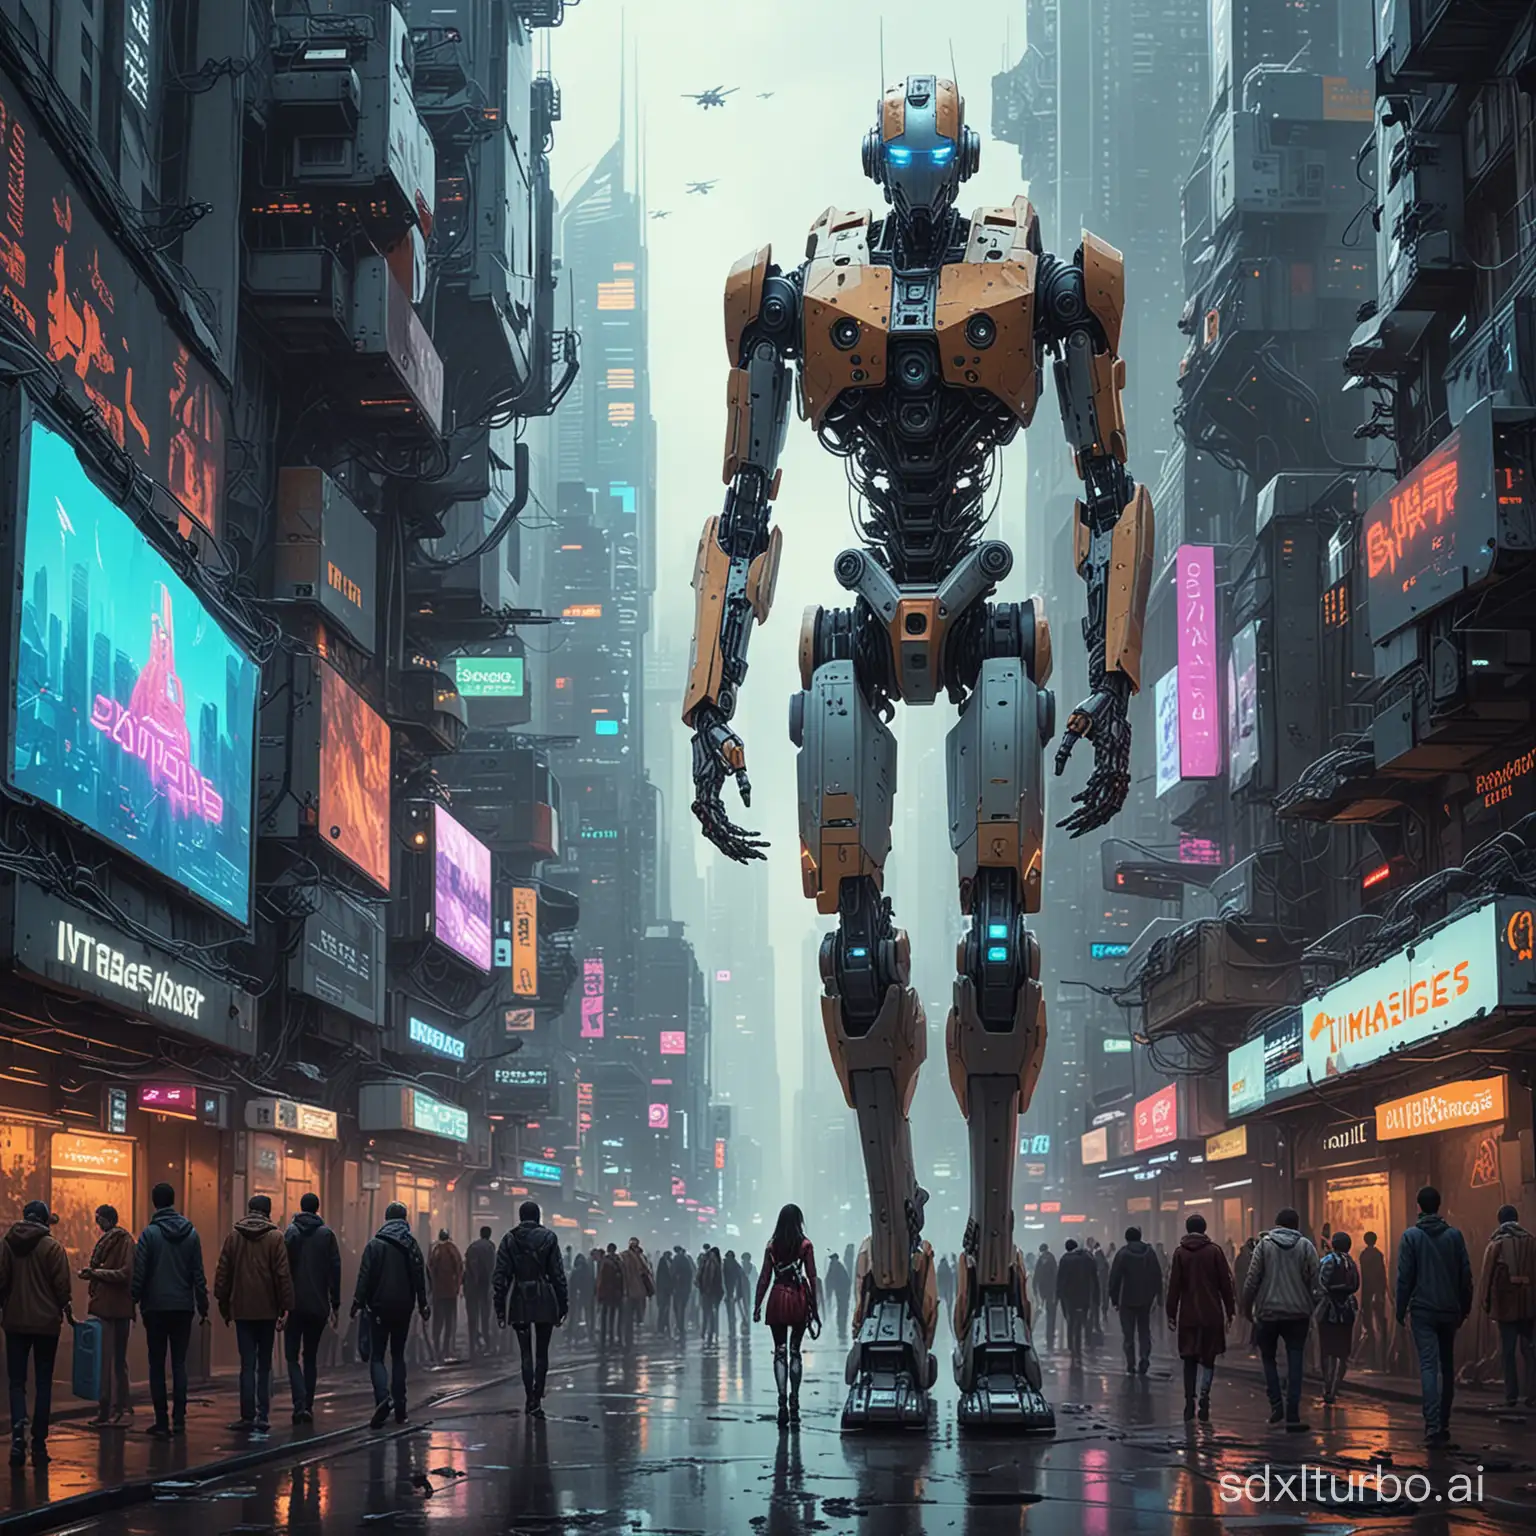 In this cyberpunk-style painting, we can see a futuristic city full of technological sophistication. Tall skyscrapers and flashing neon lights form the basic outline of the city. In the sky, drones and aircraft shuttle around, creating a busy traffic scene.

At the center of the picture, we can see a group of robots and humans coexisting harmoniously. The robots come in various shapes and sizes, some resembling humans with limbs and torso, while others are designed in various peculiar forms. They work and live together with humans, with no apparent boundaries between them.

On the streets, people are wearing fashionable cyberpunk-style clothing, walking side by side with robots. Some wear virtual reality glasses, immersing themselves in the virtual world; others interact with robots, completing tasks together. Here, the relationship between humans and robots is no longer one of opposition and rejection but one of mutual dependence and symbiosis.

In one corner of the picture, there is a robot repair shop. Inside, robots and human technicians work together to repair and upgrade robots. This indicates that in this world, robots have become an indispensable part of human life, and people have become accustomed to living together with robots.

In the distant sky, a giant billboard displays the words "Coexistence of Robots and Humans," emphasizing this theme. The entire picture is filled with the atmosphere of future technology, showcasing a world where robots and humans coexist harmoniously.

Overall, this cyberpunk-style painting portrays a futuristic world full of technological sophistication, where robots and humans coexist harmoniously, creating a better life together.